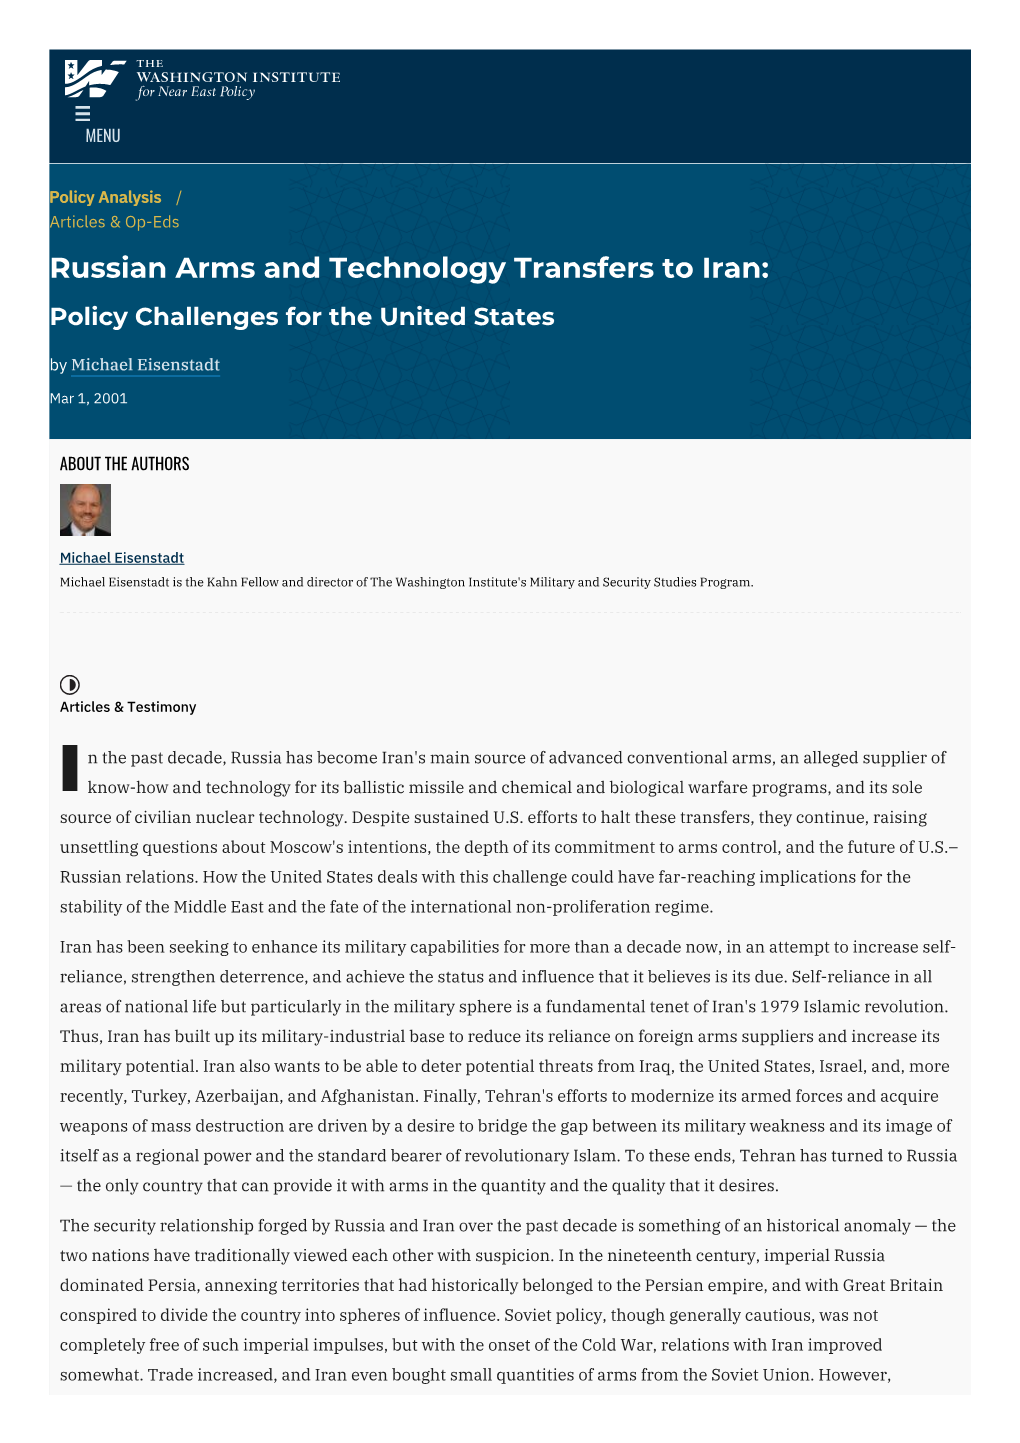 Russian Arms and Technology Transfers to Iran: Policy Challenges for the United States by Michael Eisenstadt